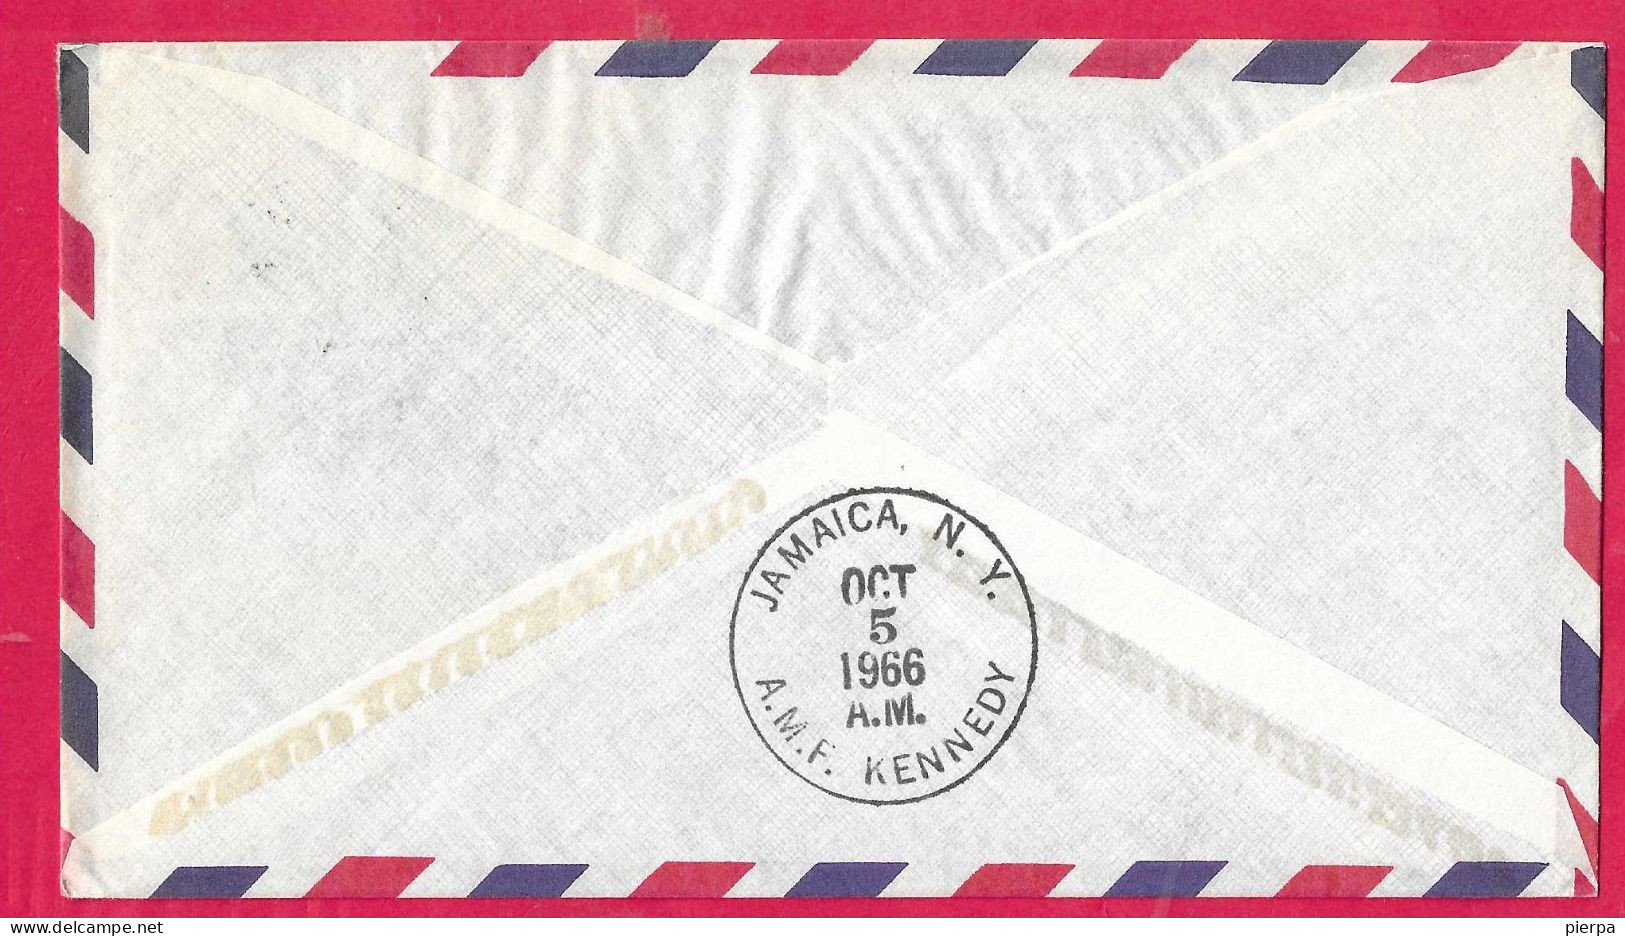 DANMARK - FIRST FLIGHT - SWA - FROM KOBENHAVN TO JAMAICA, N.Y. *5.10.66* ON OFFICIAL COVER - Posta Aerea